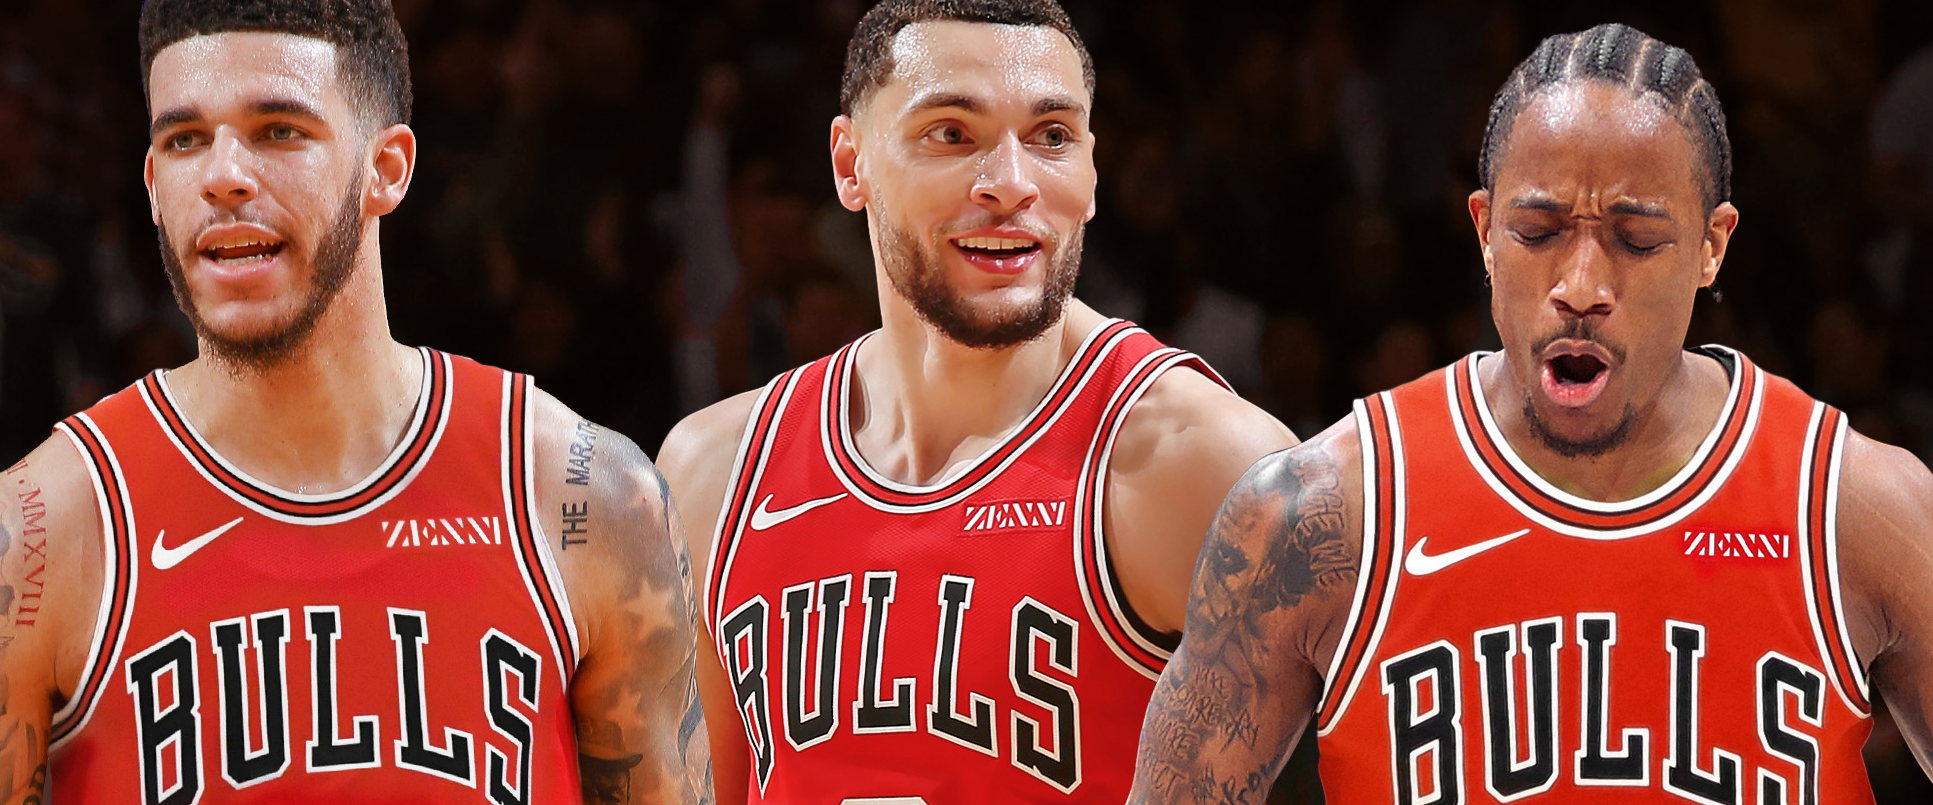 The Warriors and Bulls and How They Won Free Agency